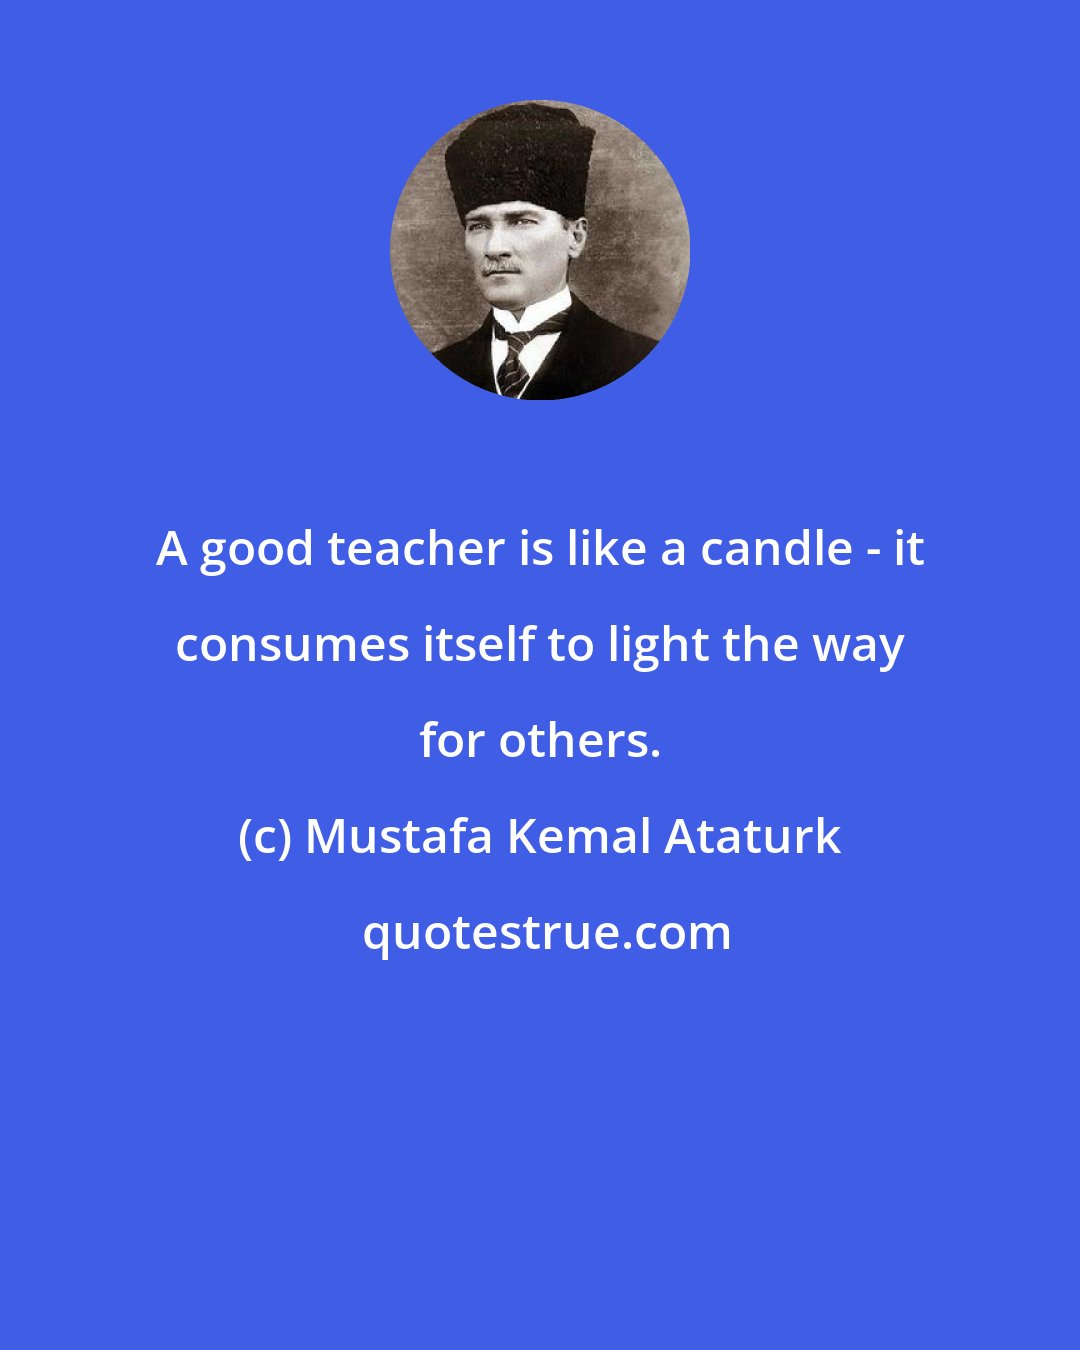 Mustafa Kemal Ataturk: A good teacher is like a candle - it consumes itself to light the way for others.